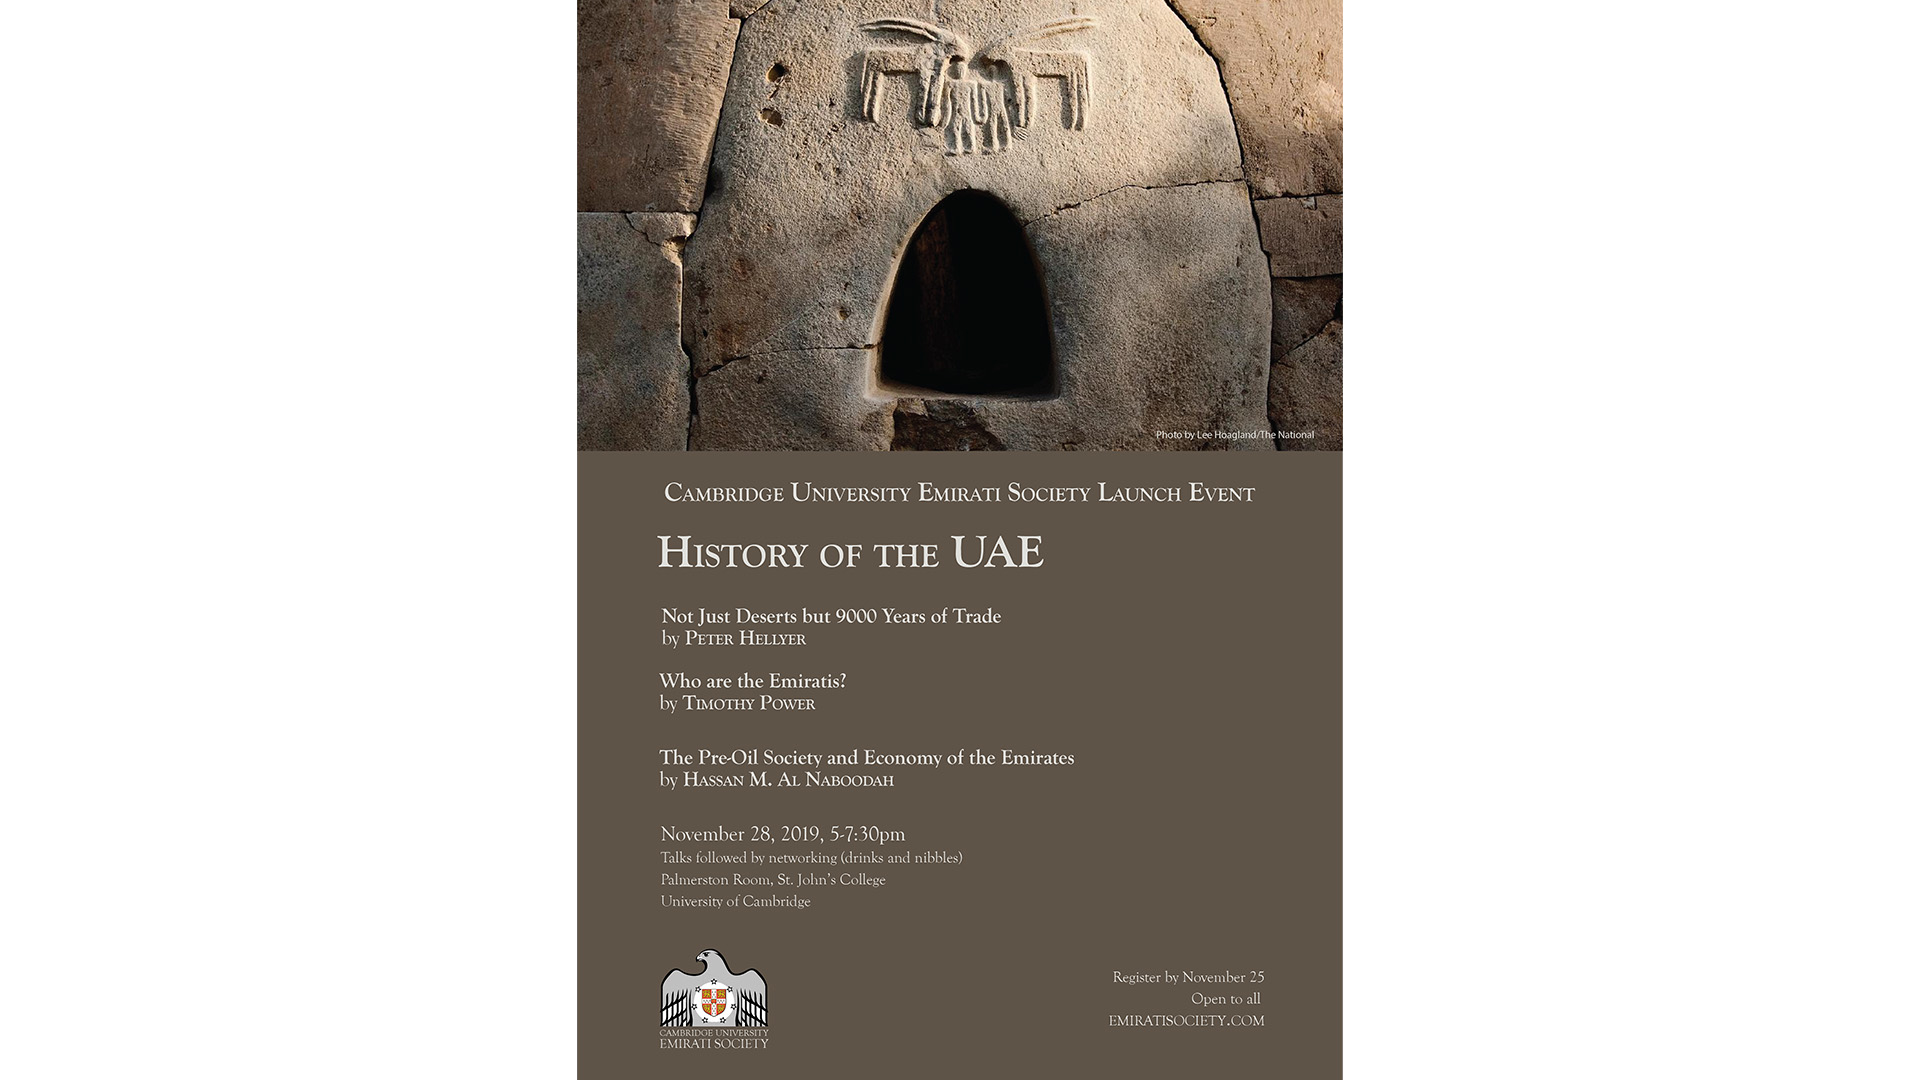 Image for History of the UAE hero section